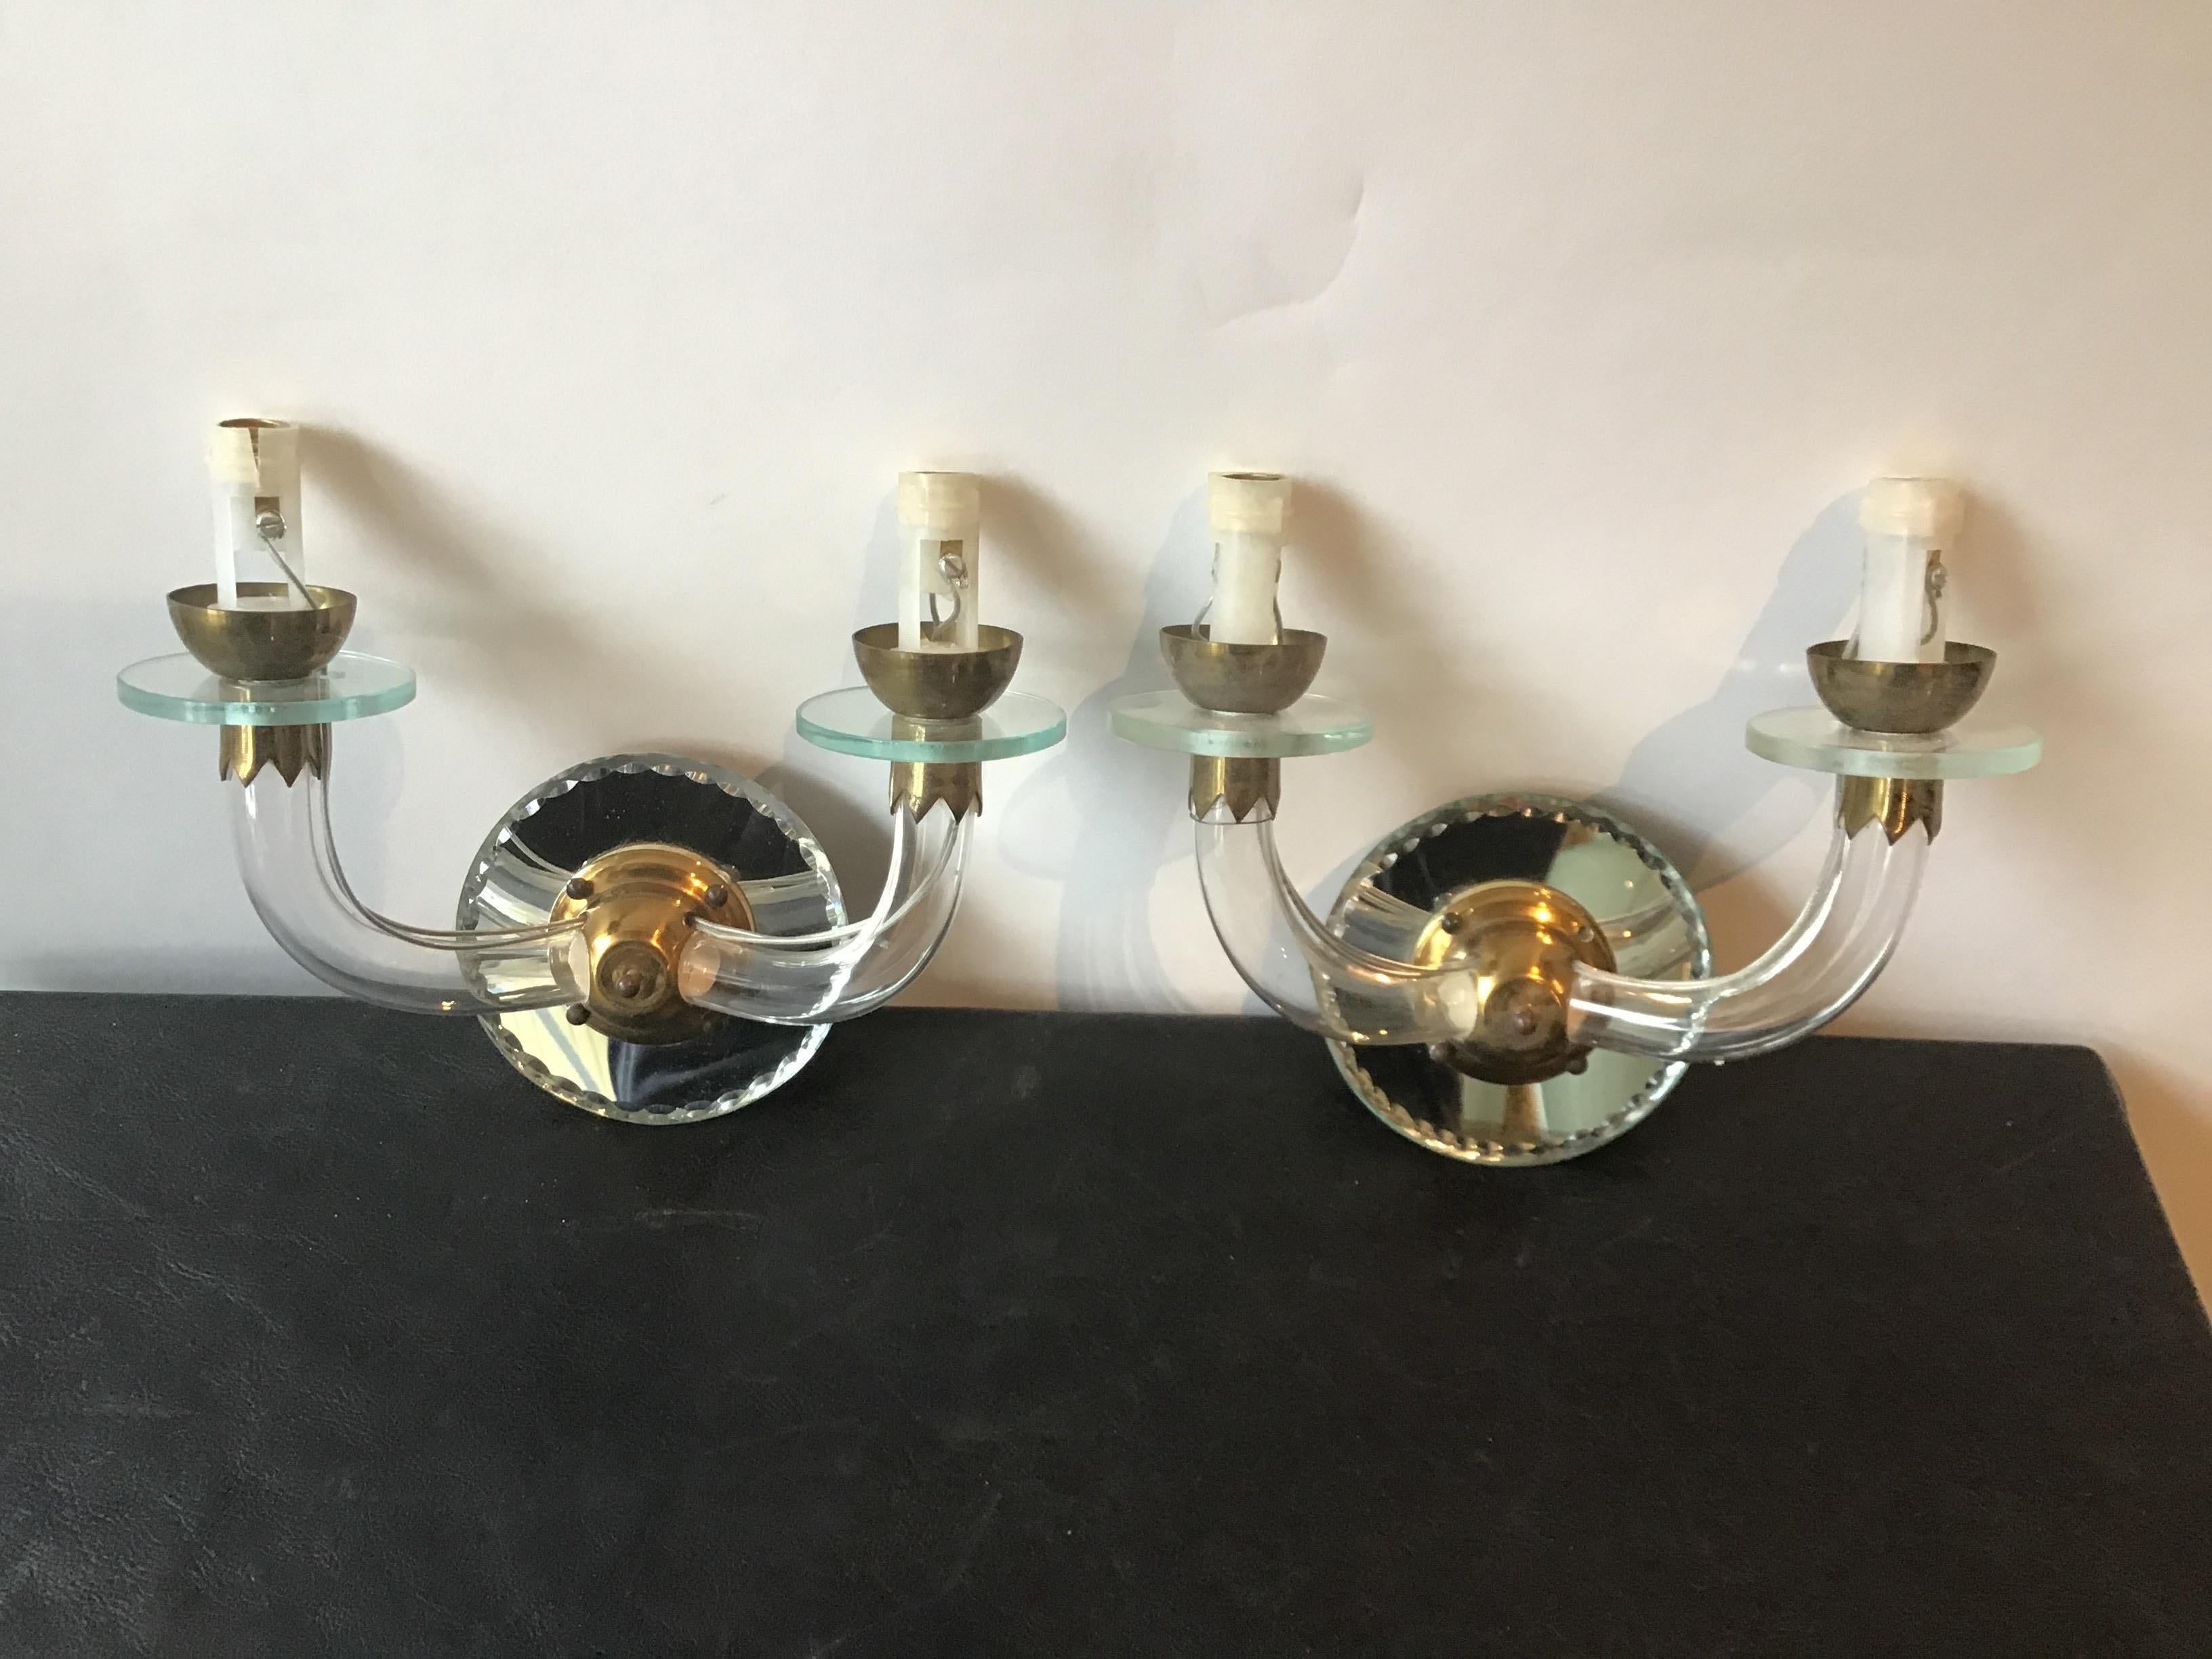 Pair of small 1940s French mirrored back sconces with glass arms. Purchased from a Greenwich, Connecticut mansion.